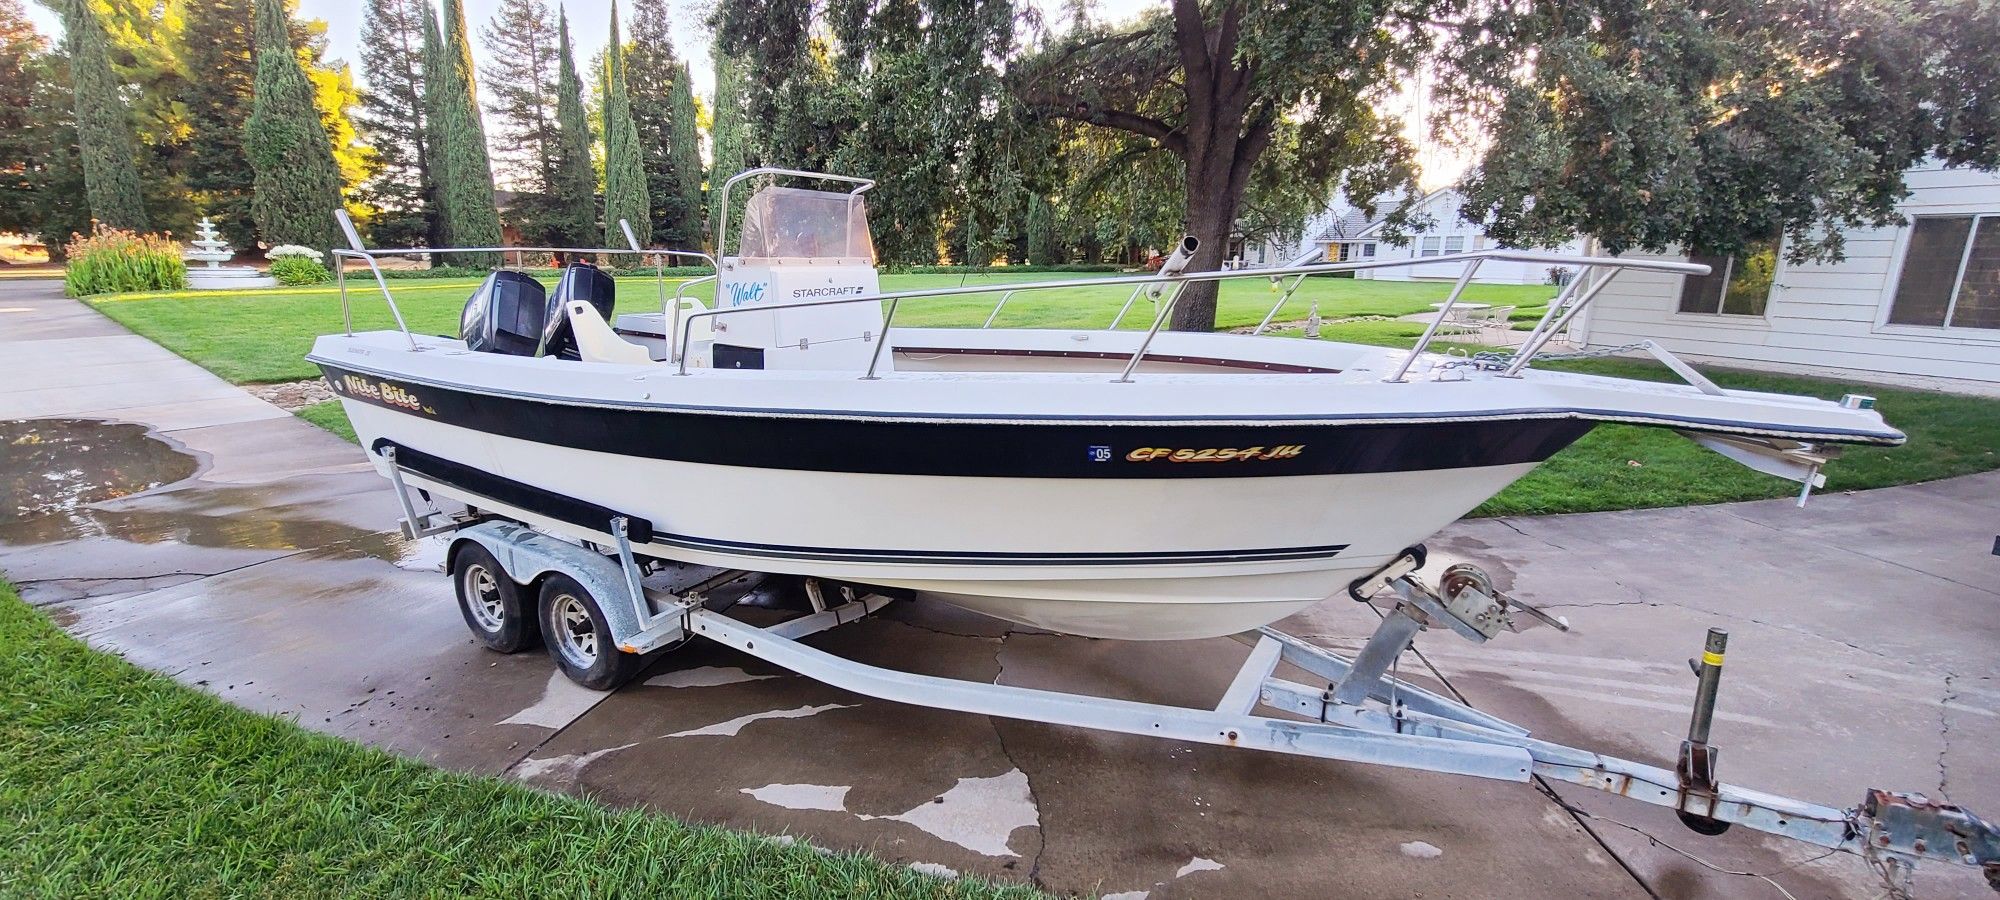 BLUEWATER 210 CENTER CONSOLE BOAT W/ 2 MERCURY 115 OUTBOARDS